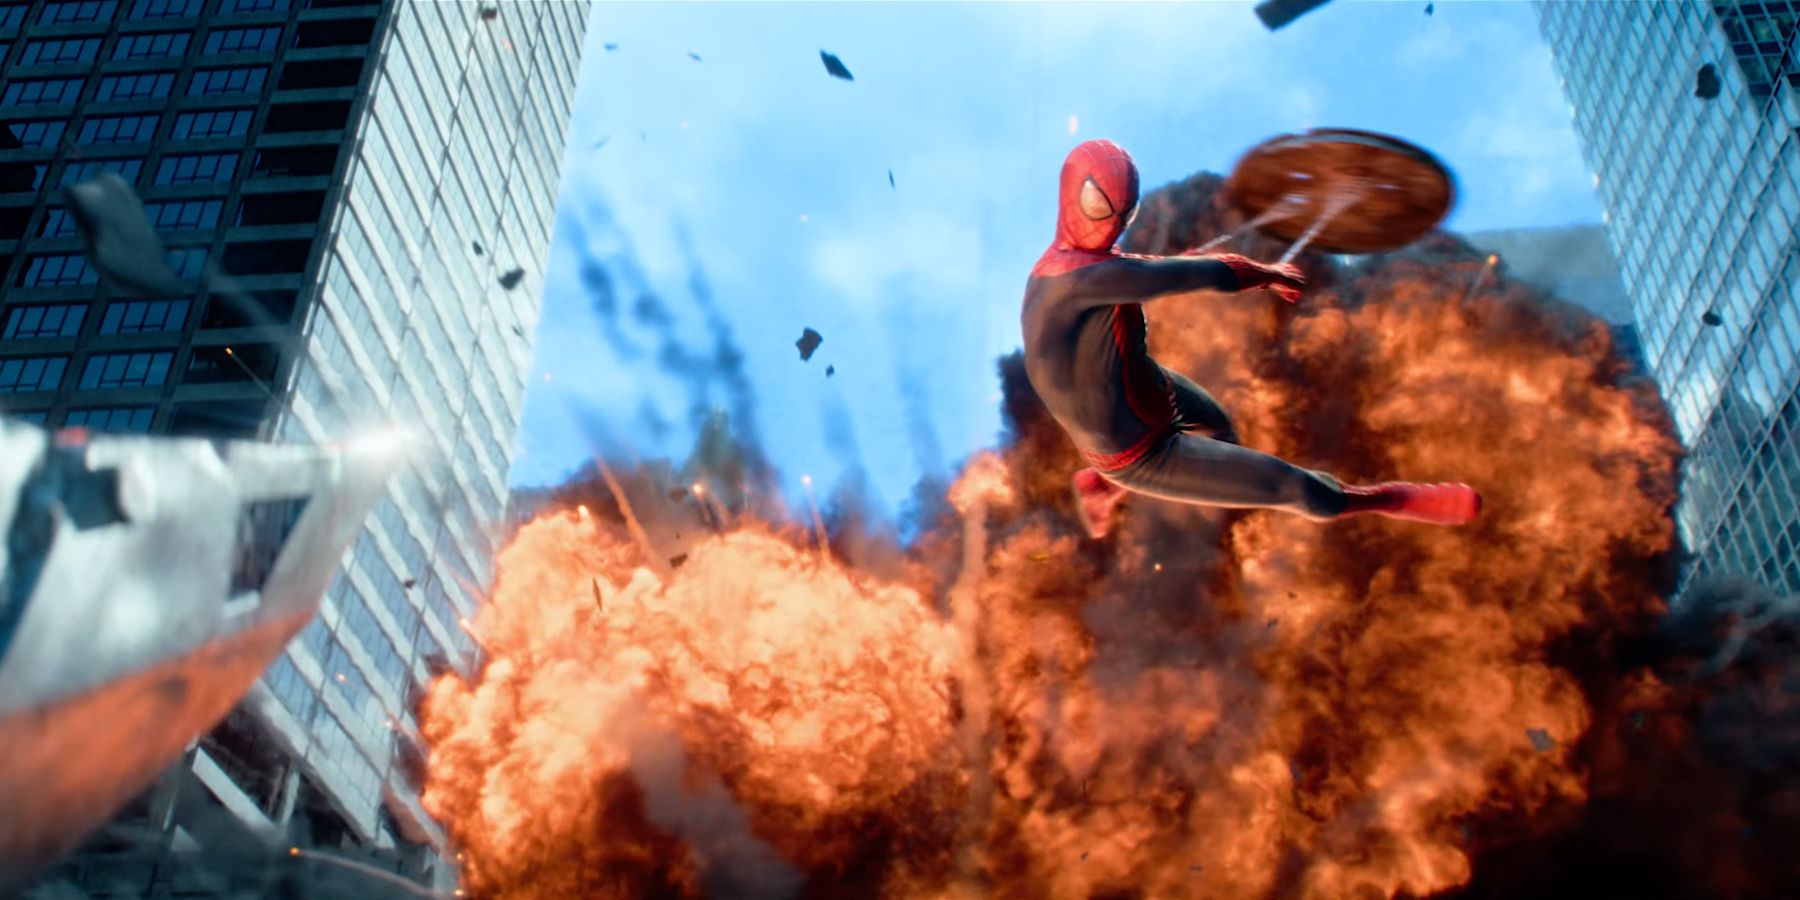 Spider-Man leaping in to fight Rhino with a manhole cover in The Amazing Spider-Man 2